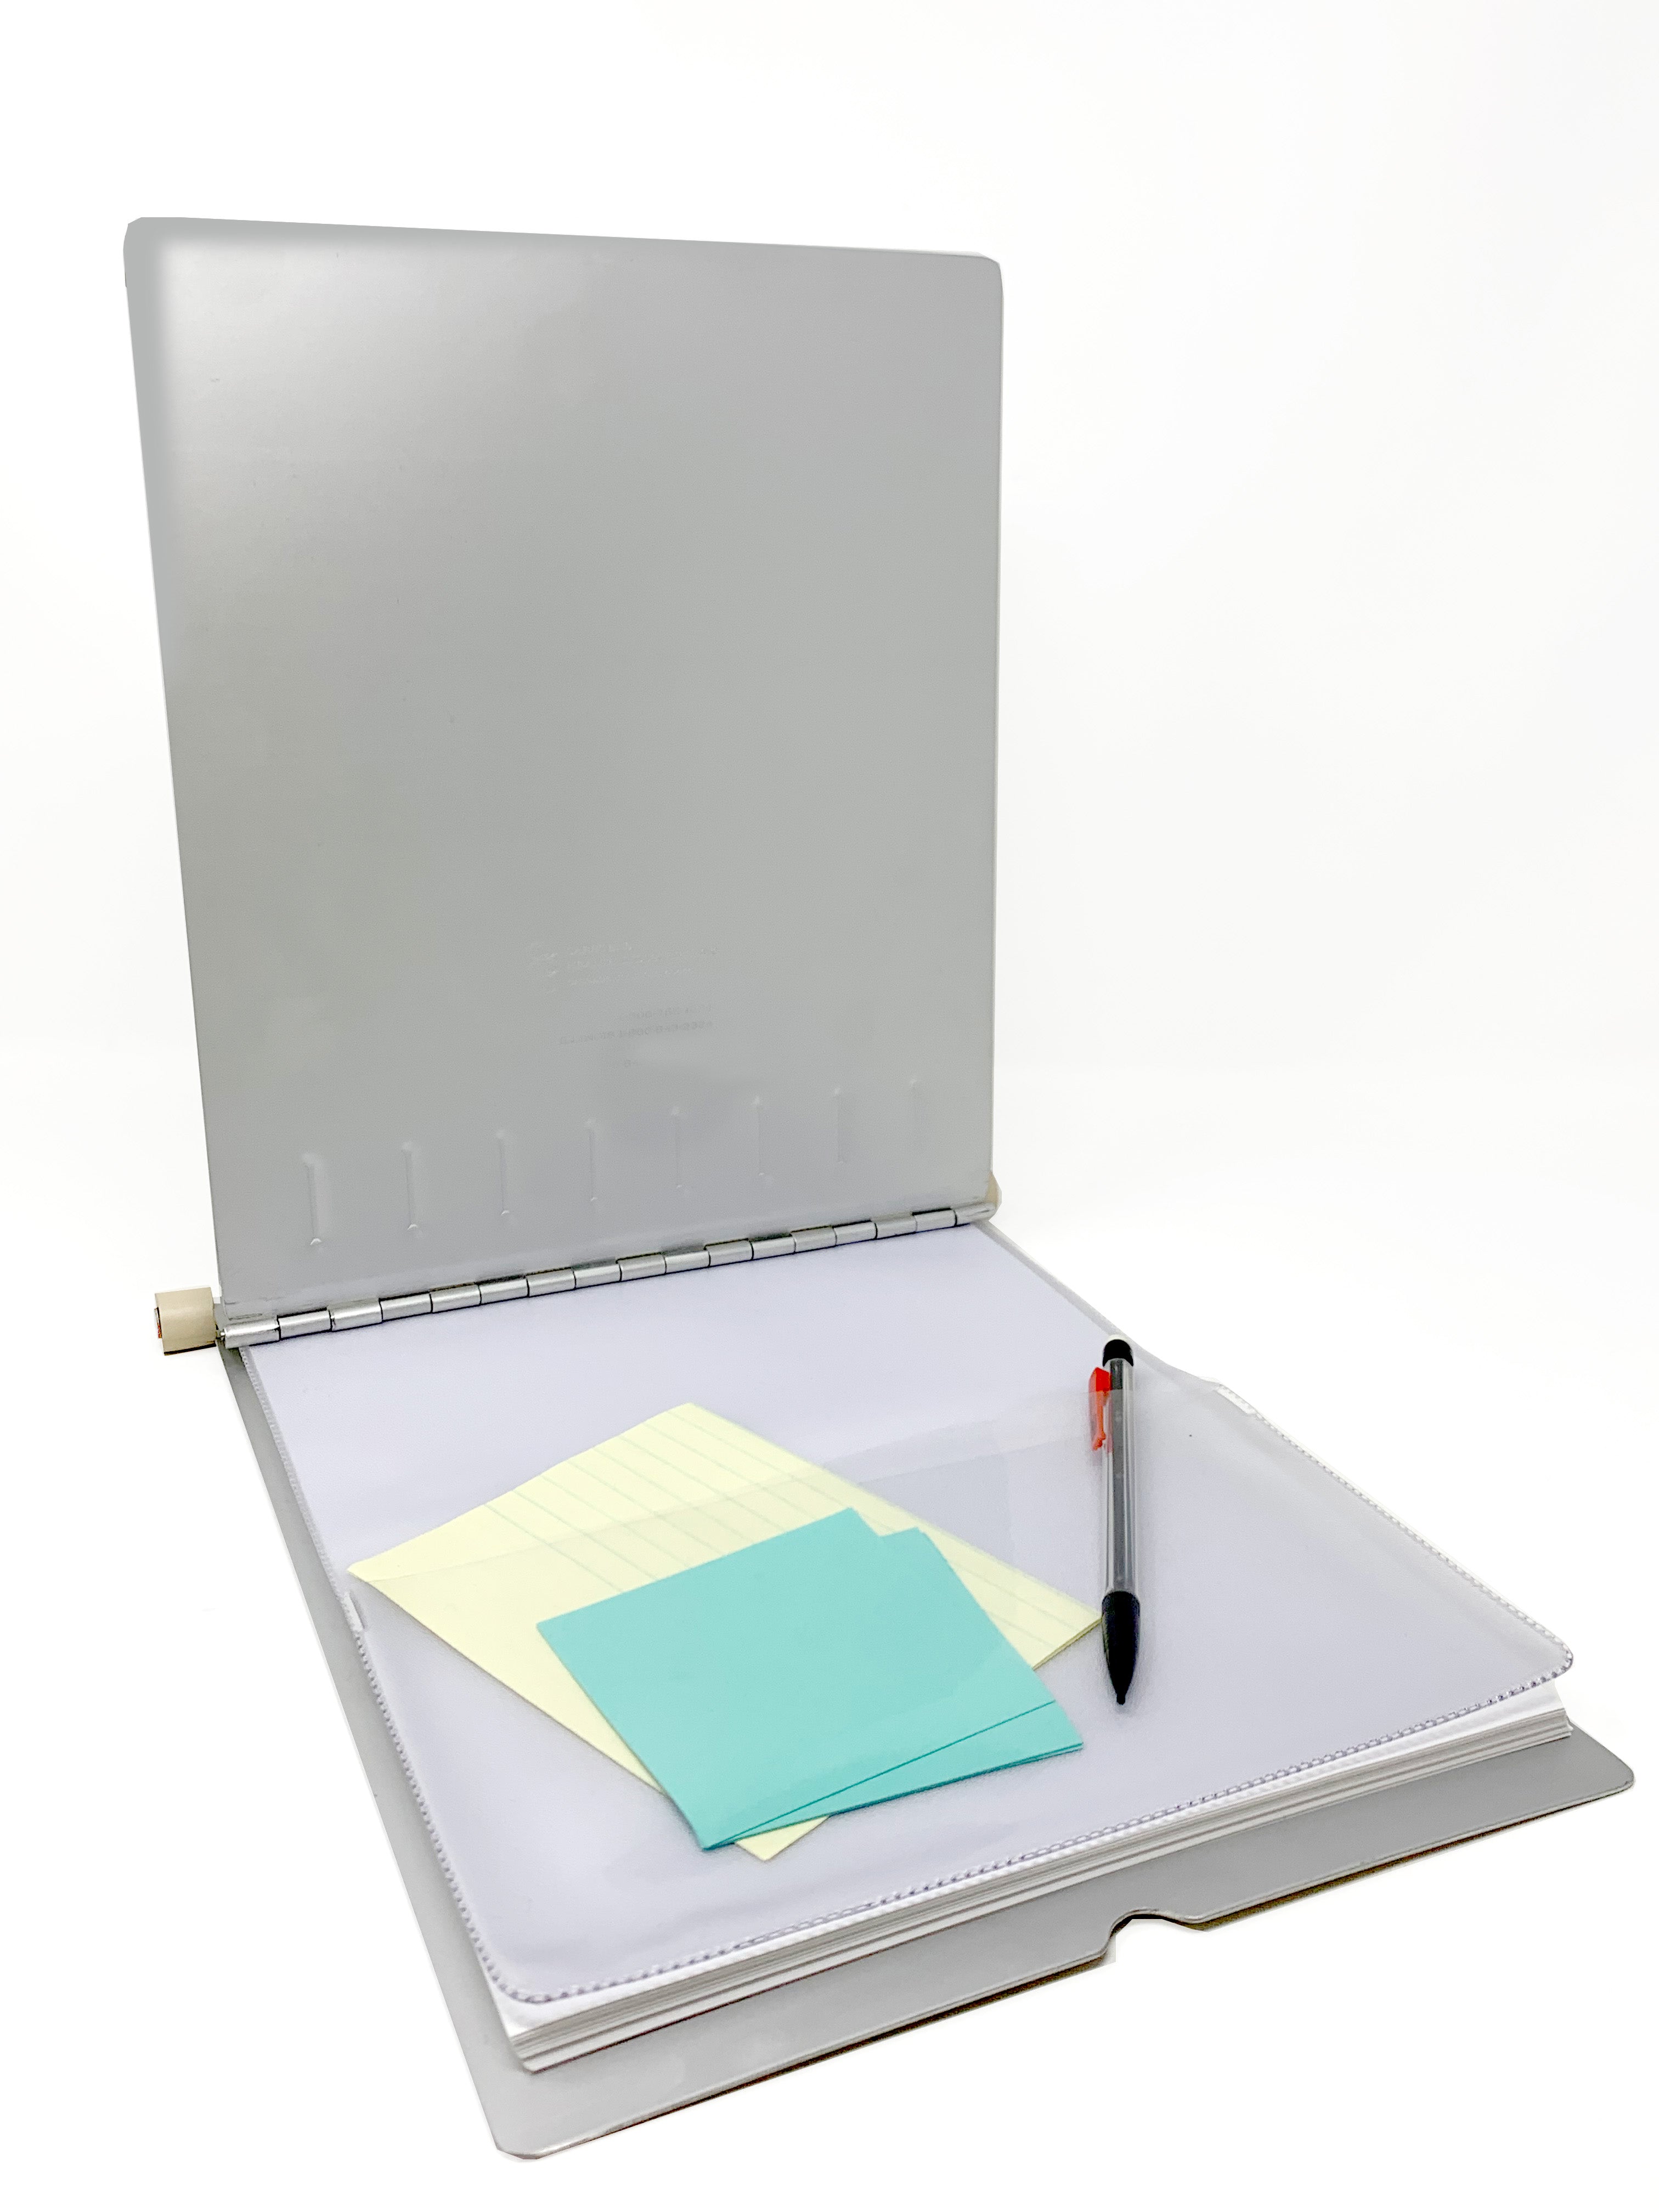 Amazon.com : SKYDUE Clipboard Folio with Refillable Notepad, 13.2